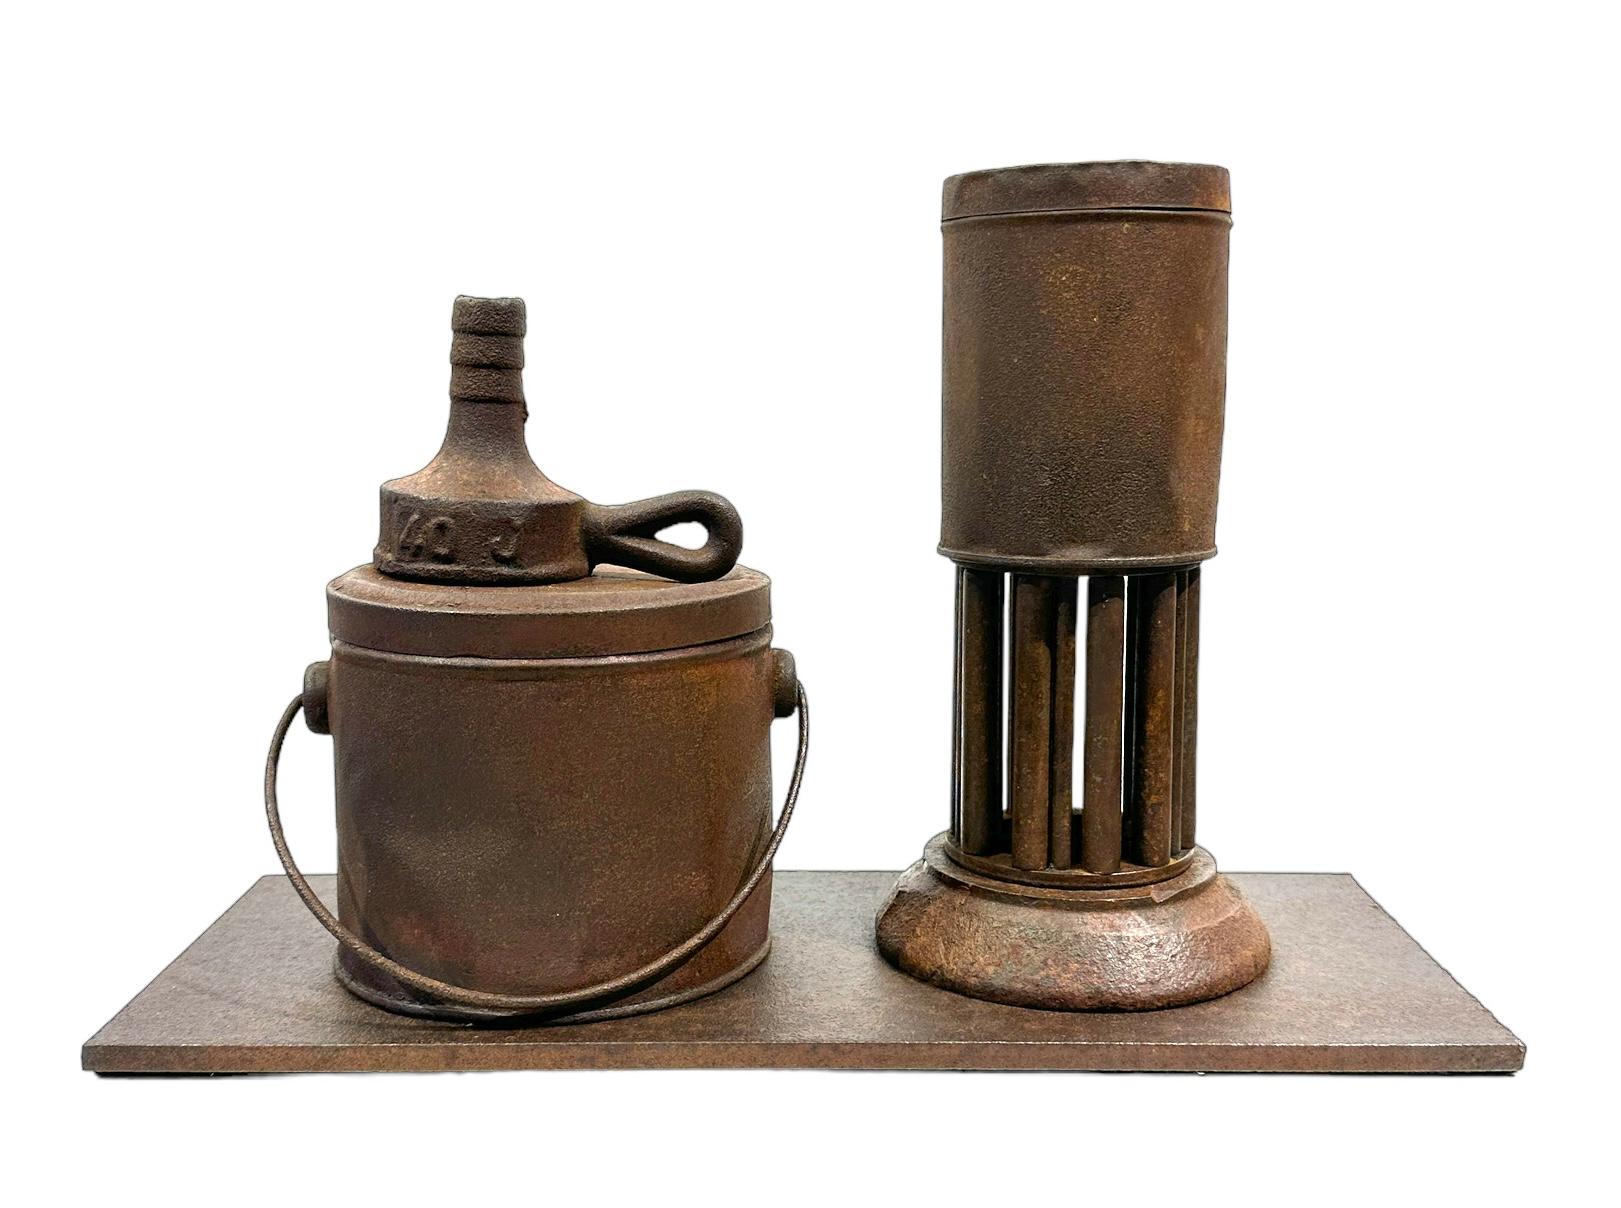 Known for his steel furniture, Jim Rose was an avid collector and scoured salvage yards for unique, interesting items.  Here he has paired various repurposed finds together to create this imaginative sculpture. The rust patinated objects are mounted